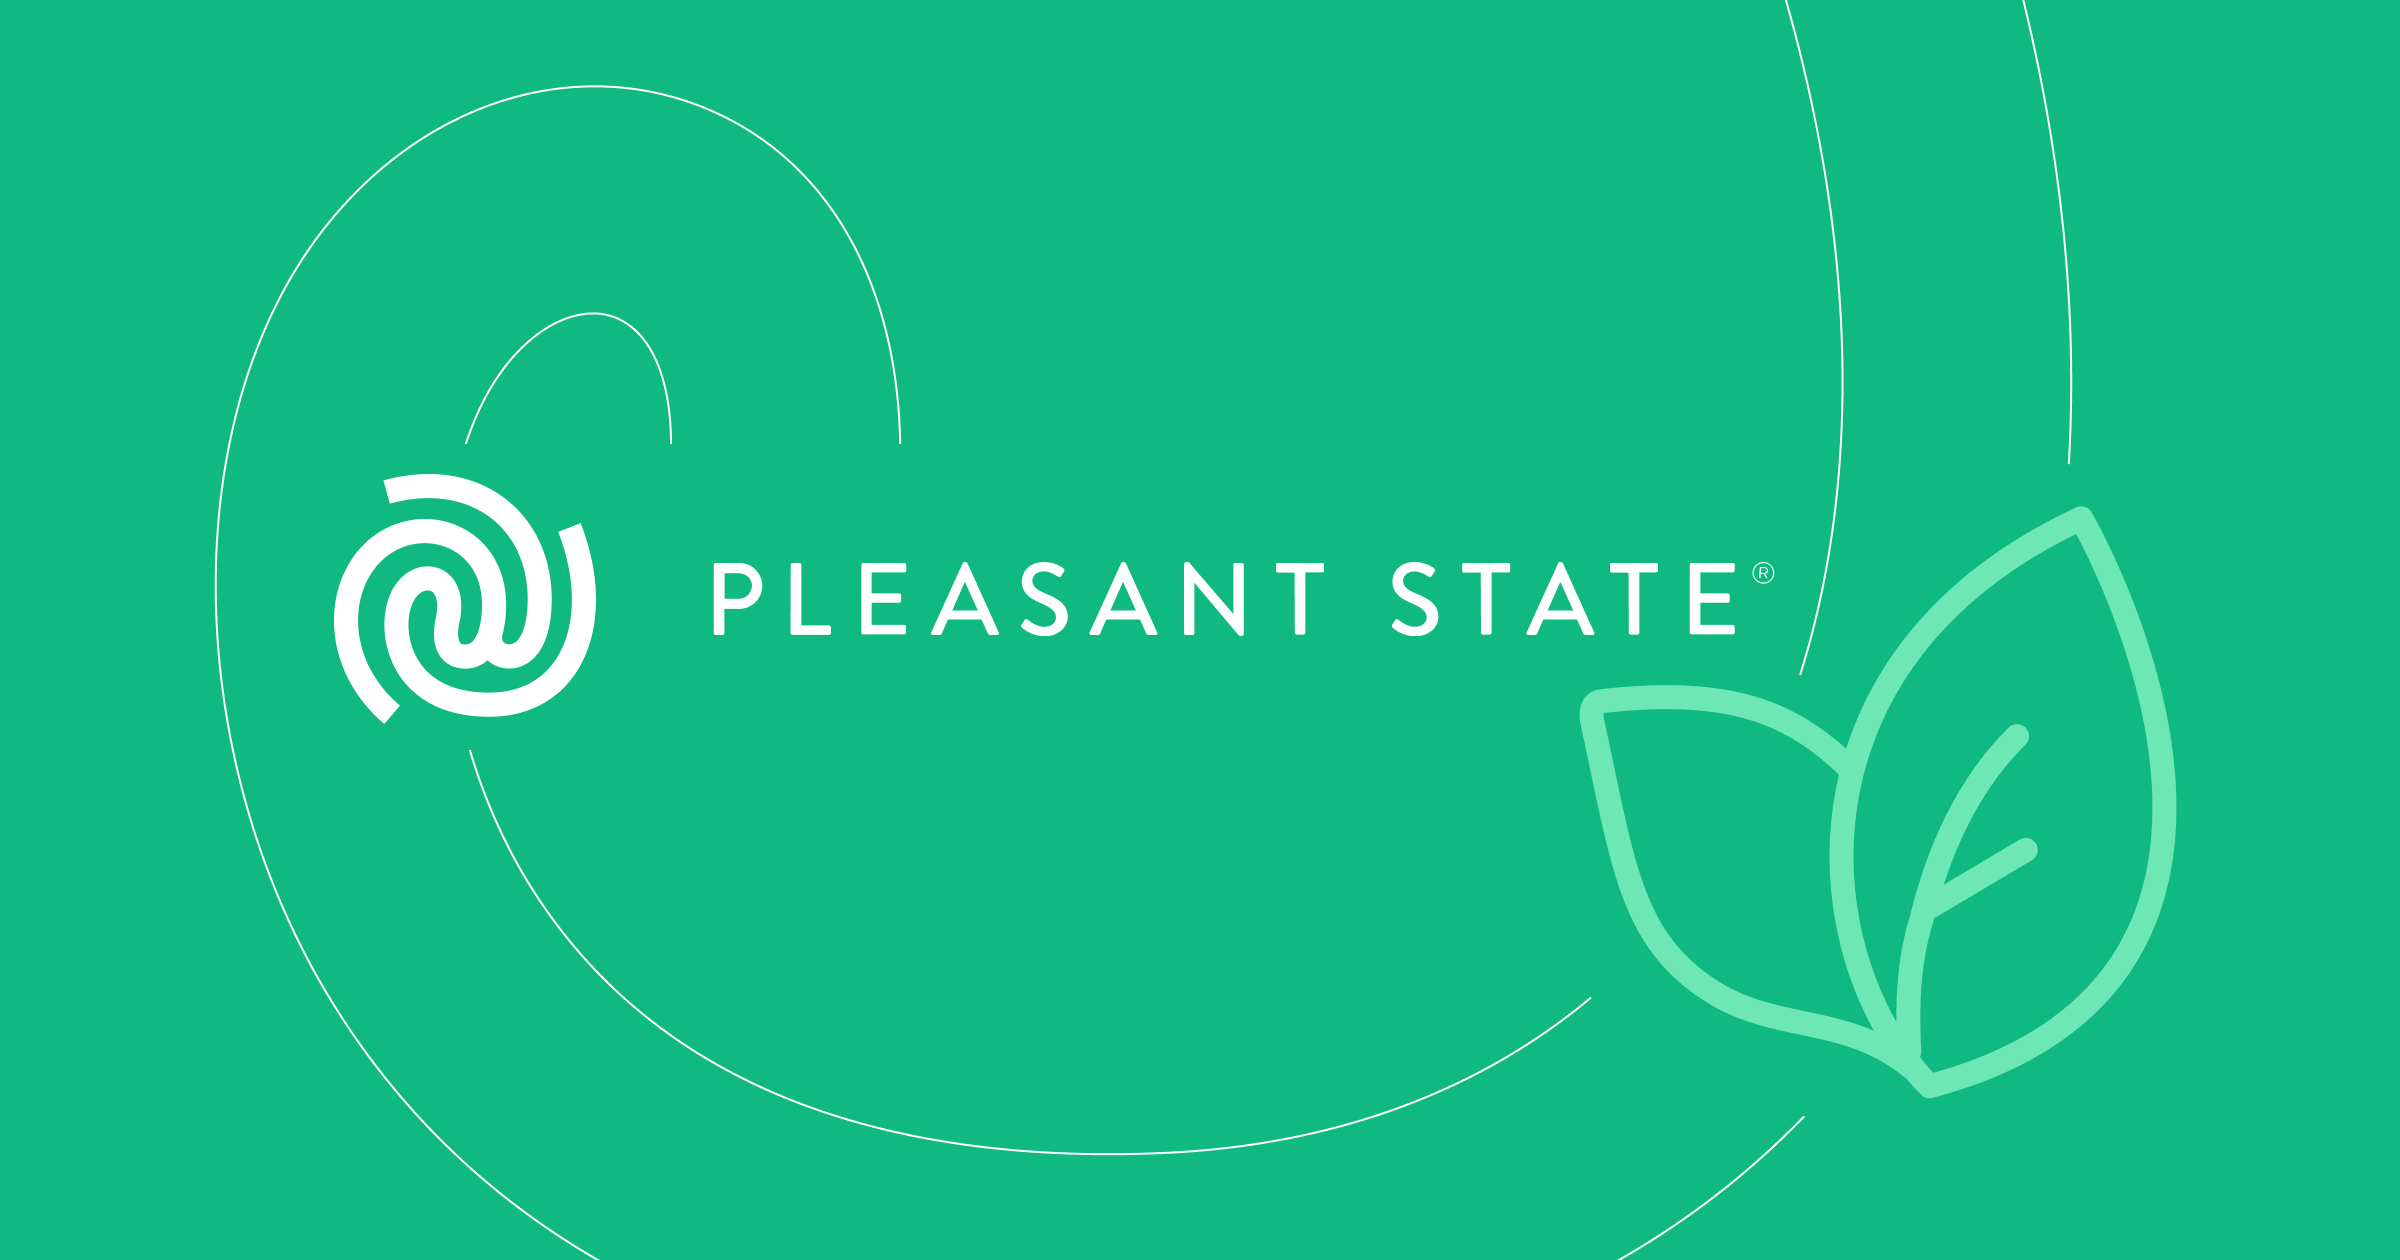 Pleasant State's journey to sustainability — and how other eCommerce founders can follow